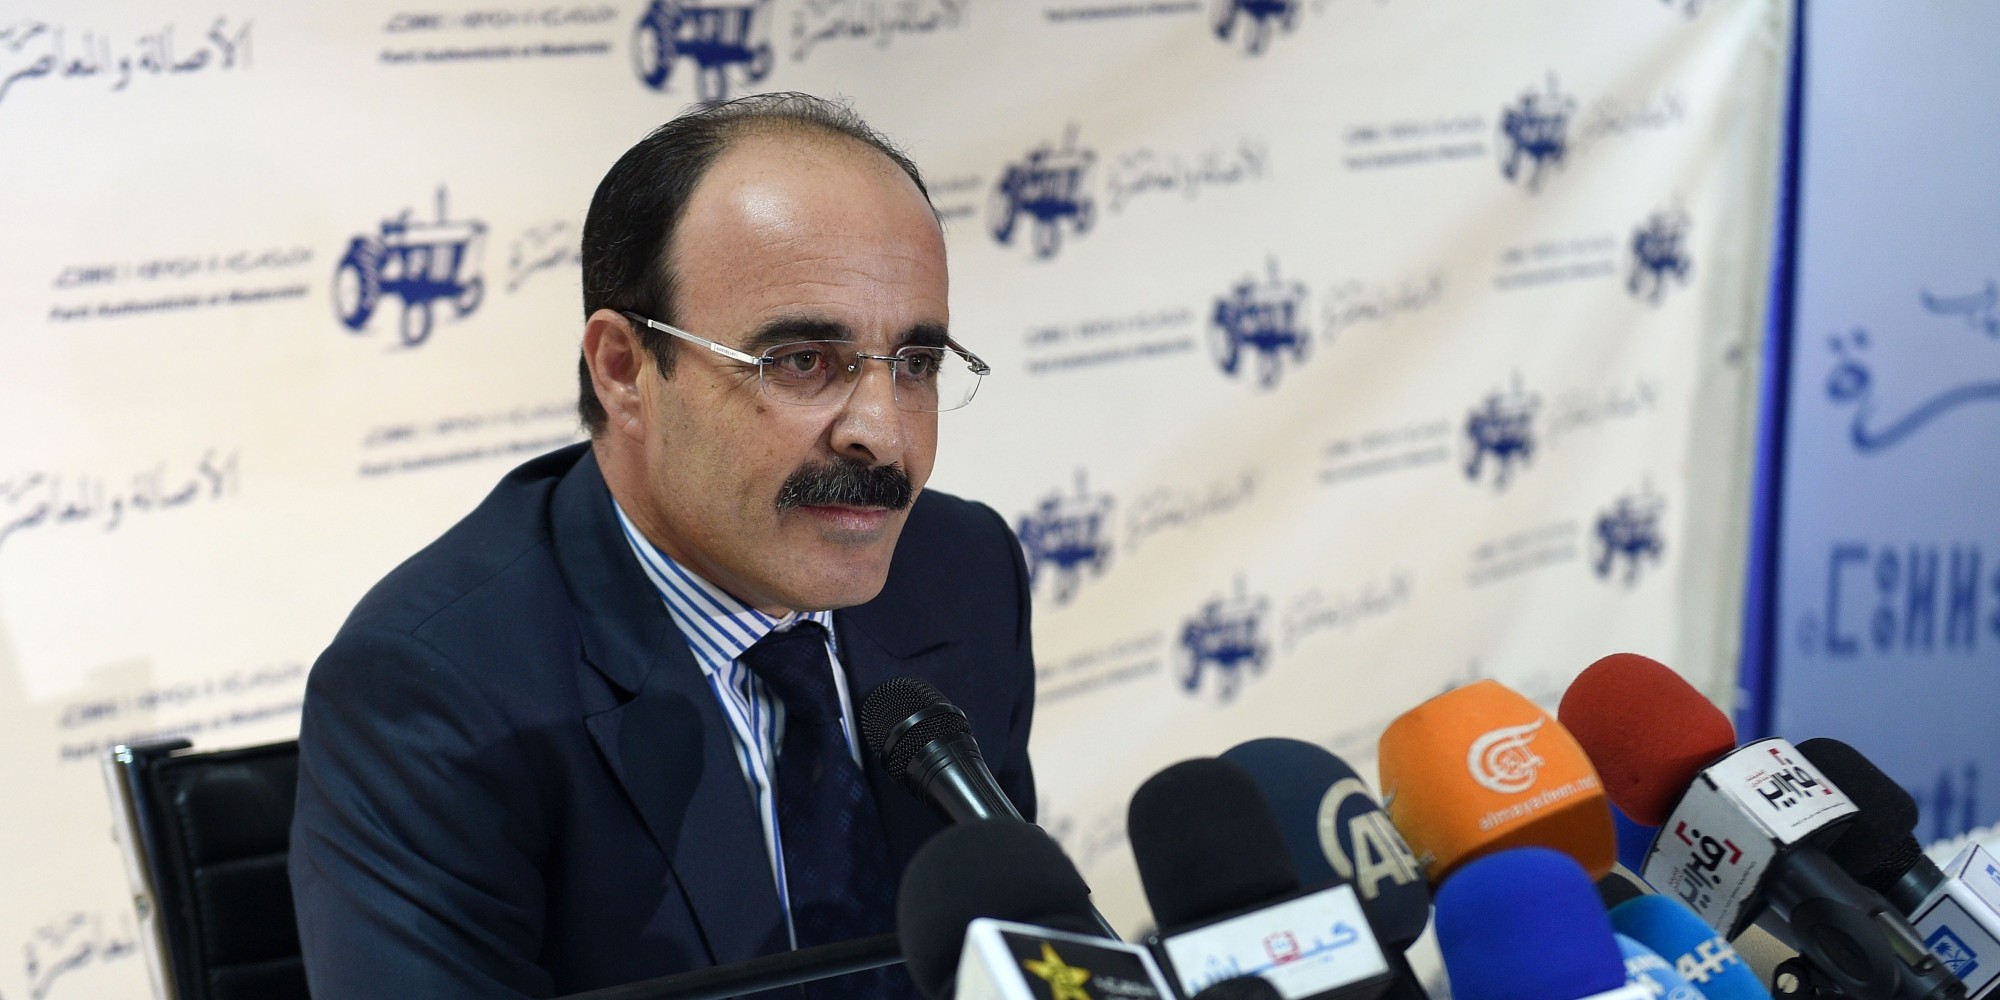 Ilyas el Omari, Vice Secretary General of the Party of Authenticity and Modernity (PAM) speaks during a press conference following the results from Moroccan municipal and regional elections on September 5, 2015 in Rabat. Morocco's Islamists came first in regional elections seen as a test of their popularity after nearly four years in power, but trailed the liberal opposition in municipal polls, results showed. The PAM, a liberal opposition party founded by a politician close to the king, came second with 19.4 percent.      AFP PHOTO / FADEL SENNA        (Photo credit should read FADEL SENNA/AFP/Getty Images)